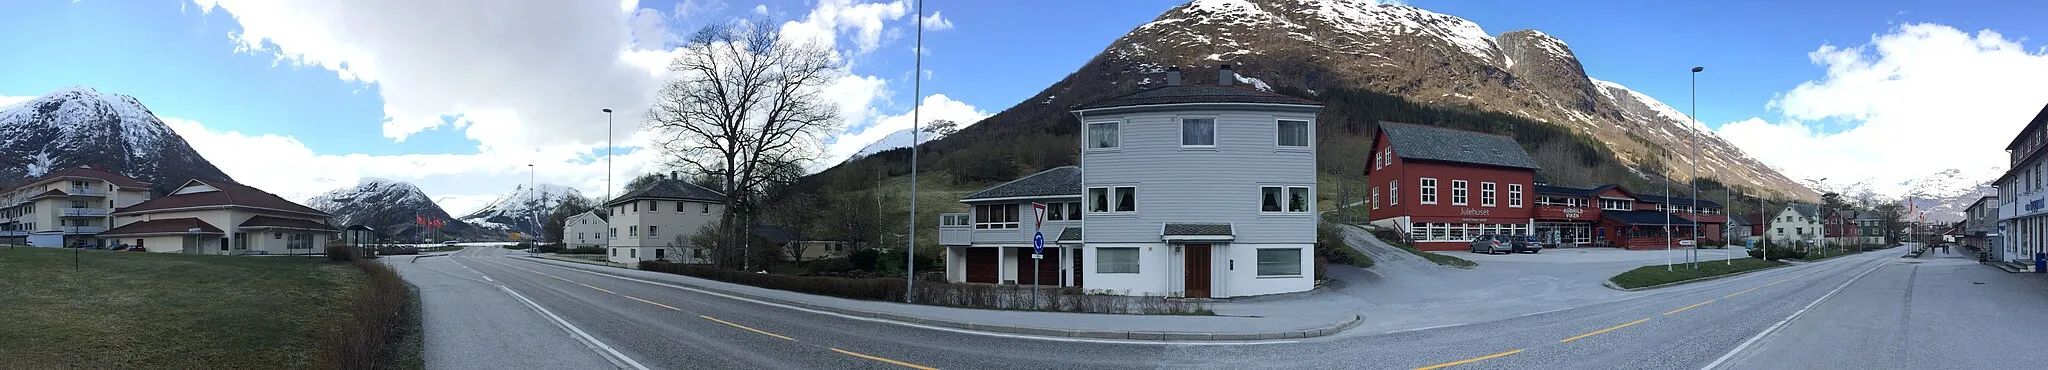 Photo showing: Fold-out-panorama of Skei and E39, Jølster Municipality, Sogn og Fjordane, Norway, 6th May 2015. (iPhone panoramic photo, distortion may occur in details and continuity.)